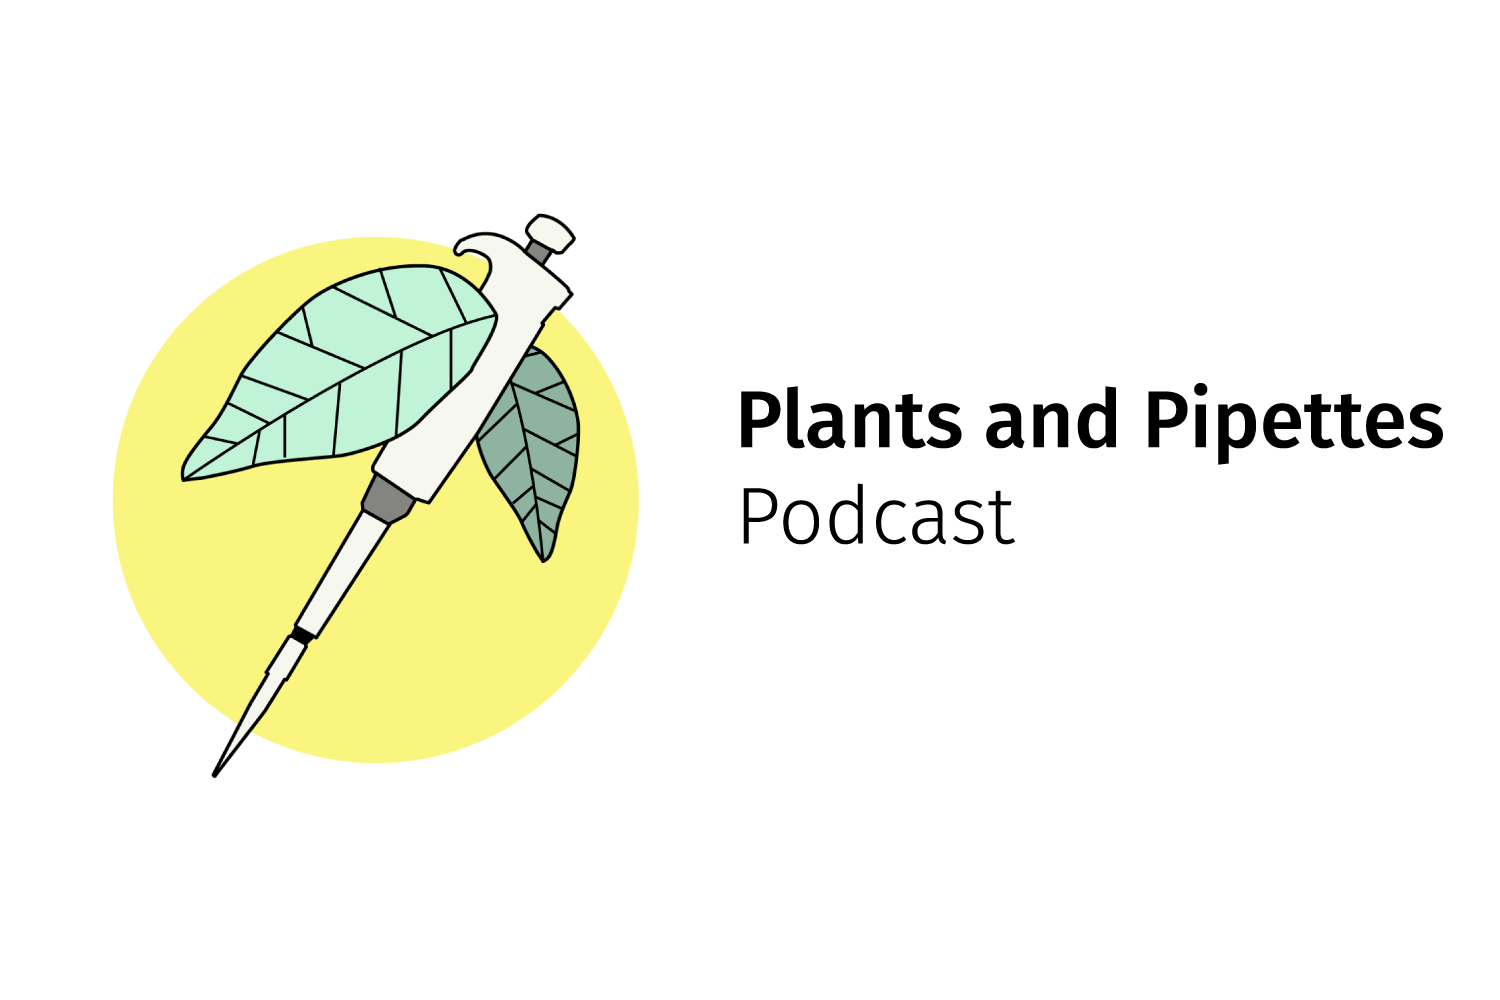 The Sound of Plants and Pipettes